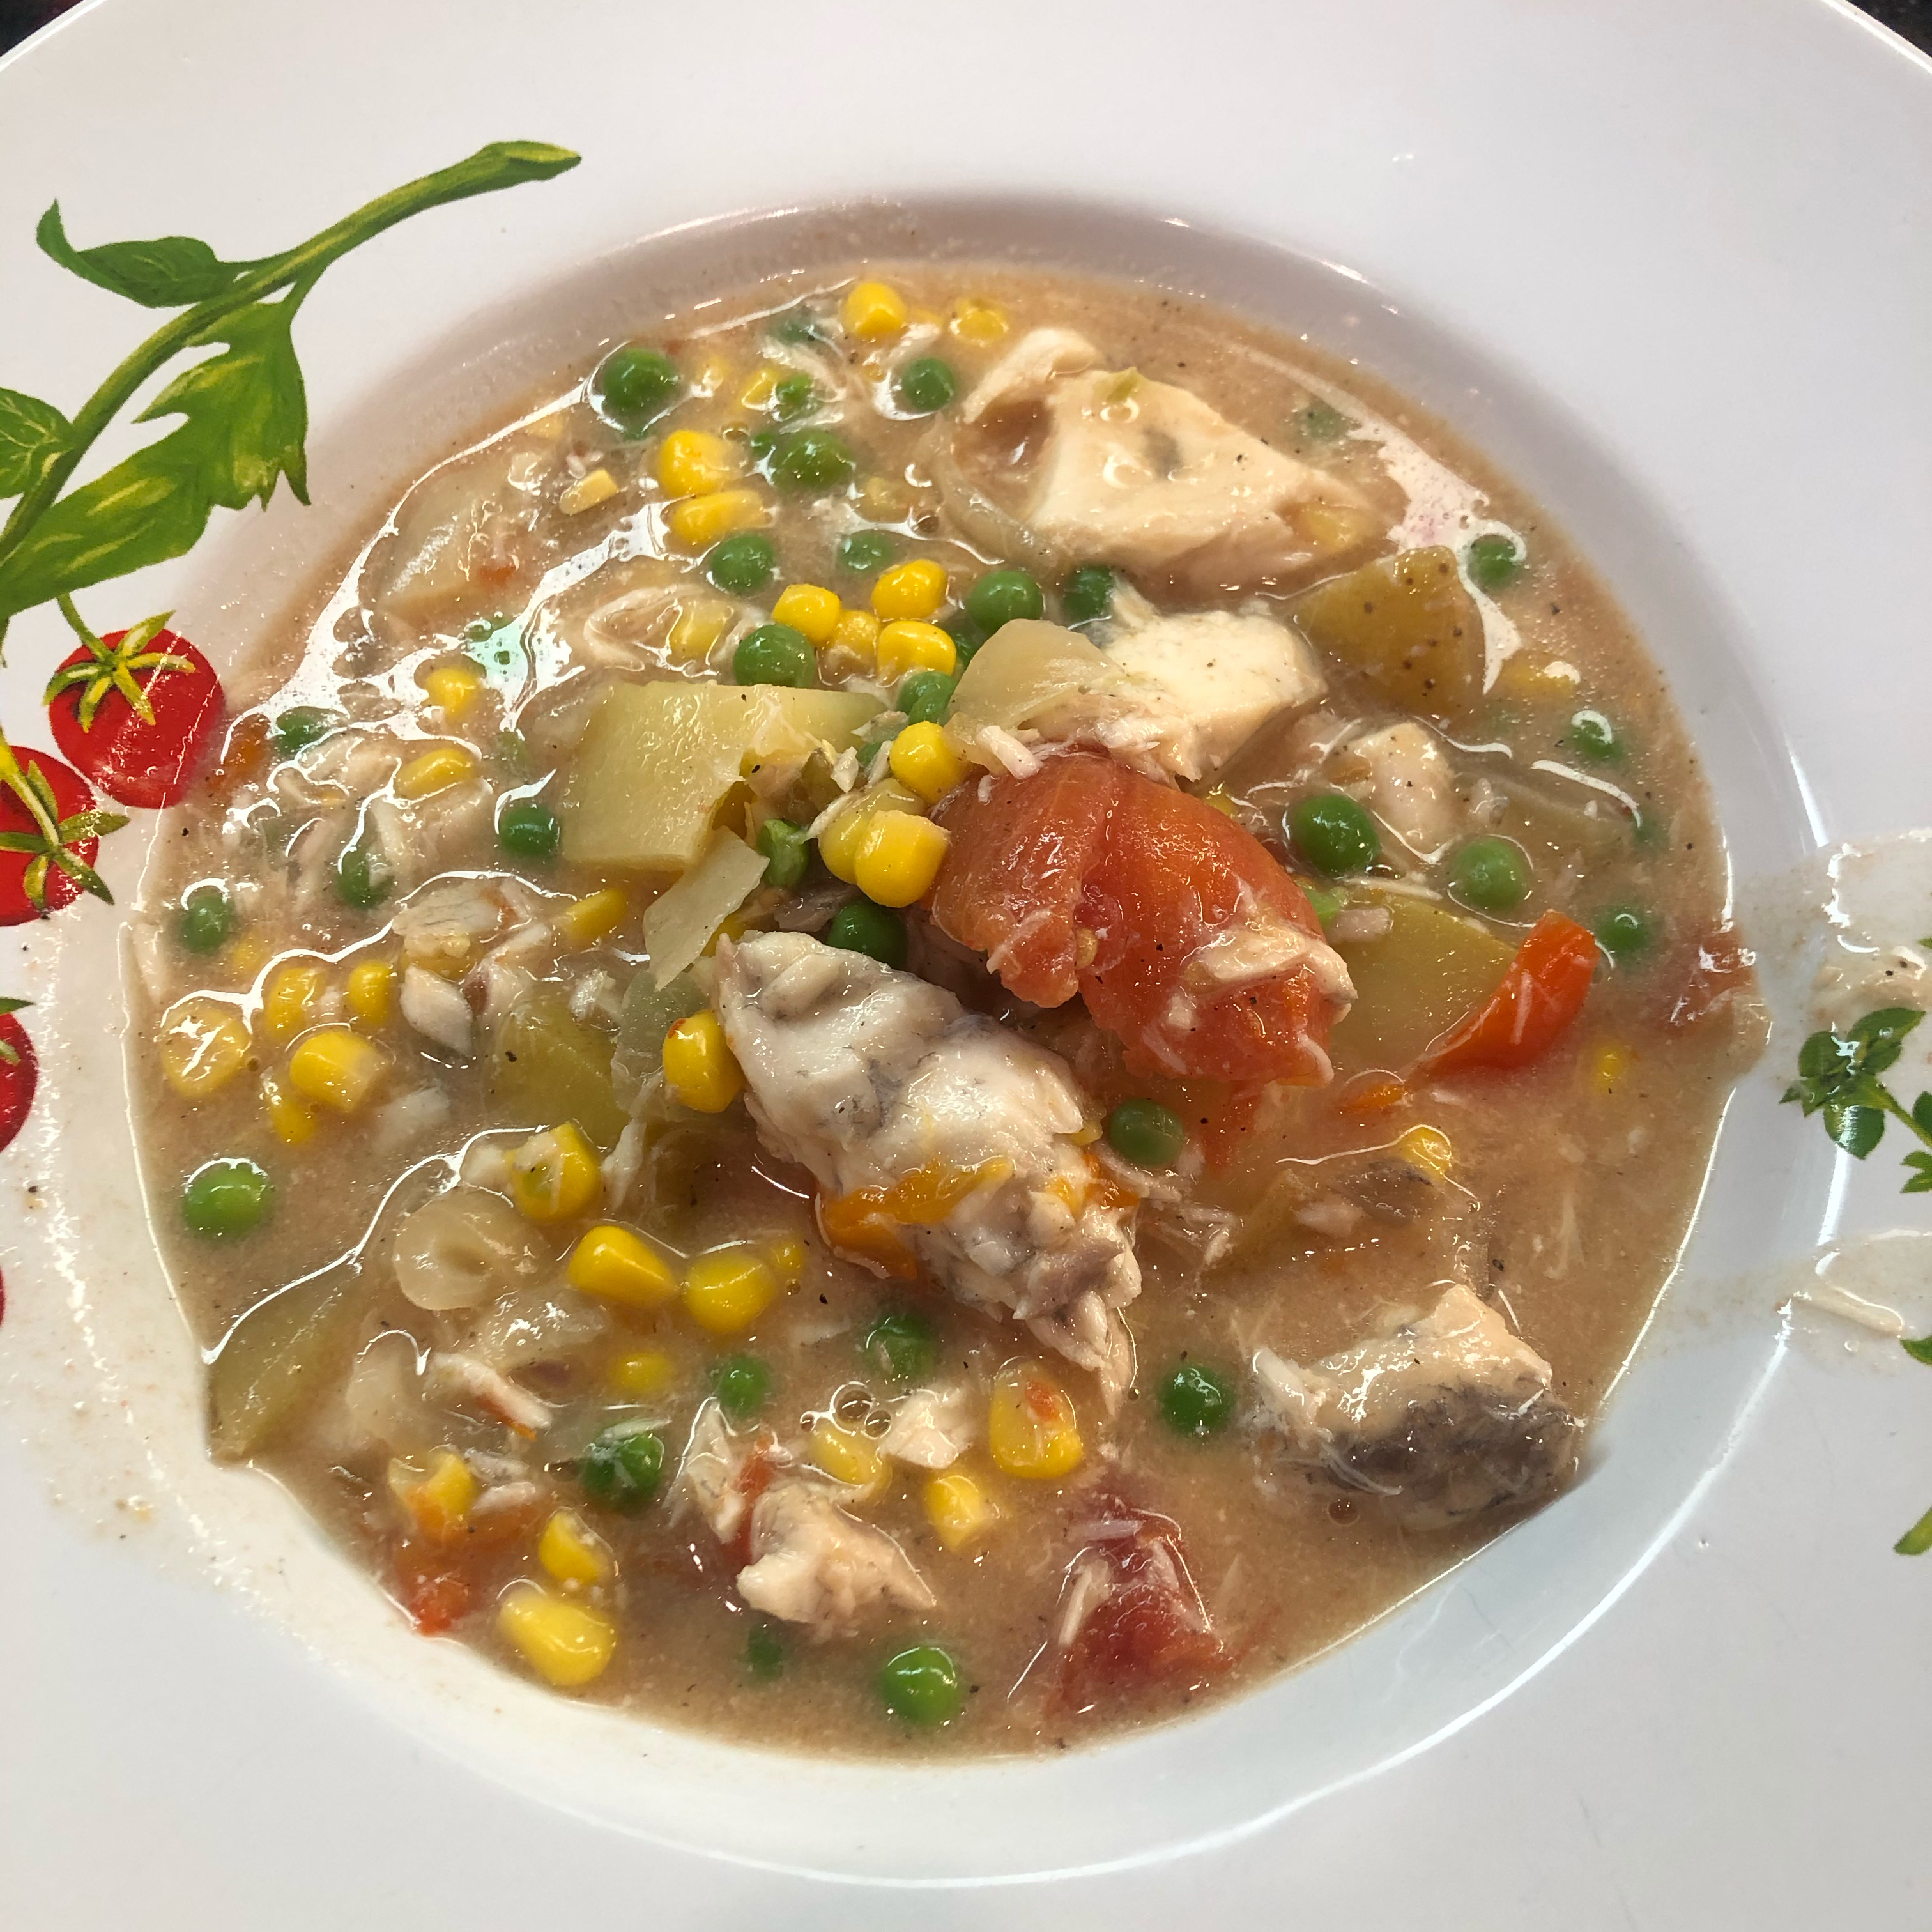 Hearty Fish Chowder from Reynolds Wrap®